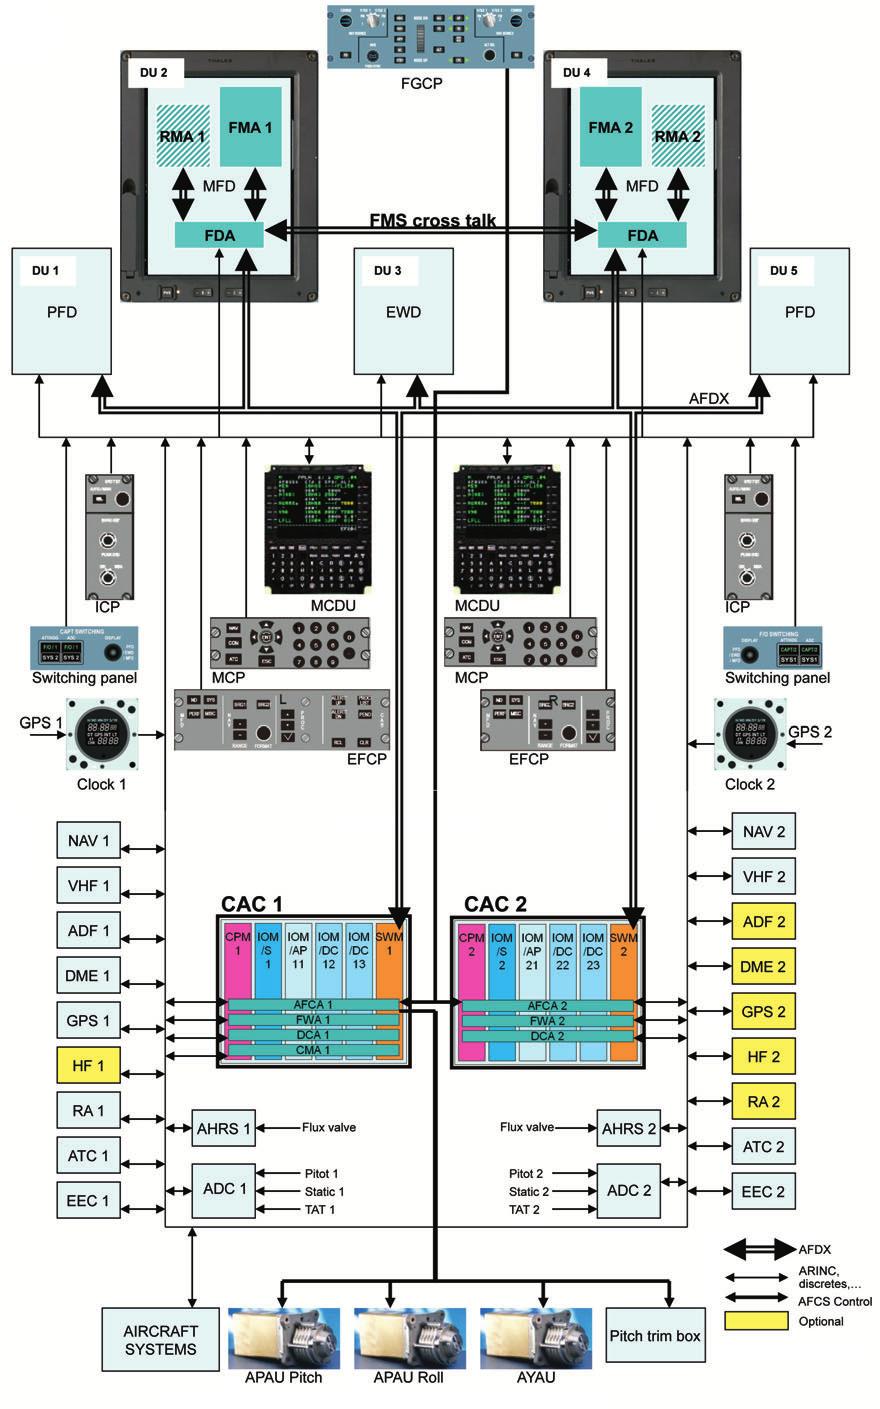 P. Navigation system 8. FMS ATA 34 The dual THALES Flight Management System (FMS) installed on ATR 72/42-600 aircraft is composed of two identical sets of software applications, called FMS1 and FMS2.